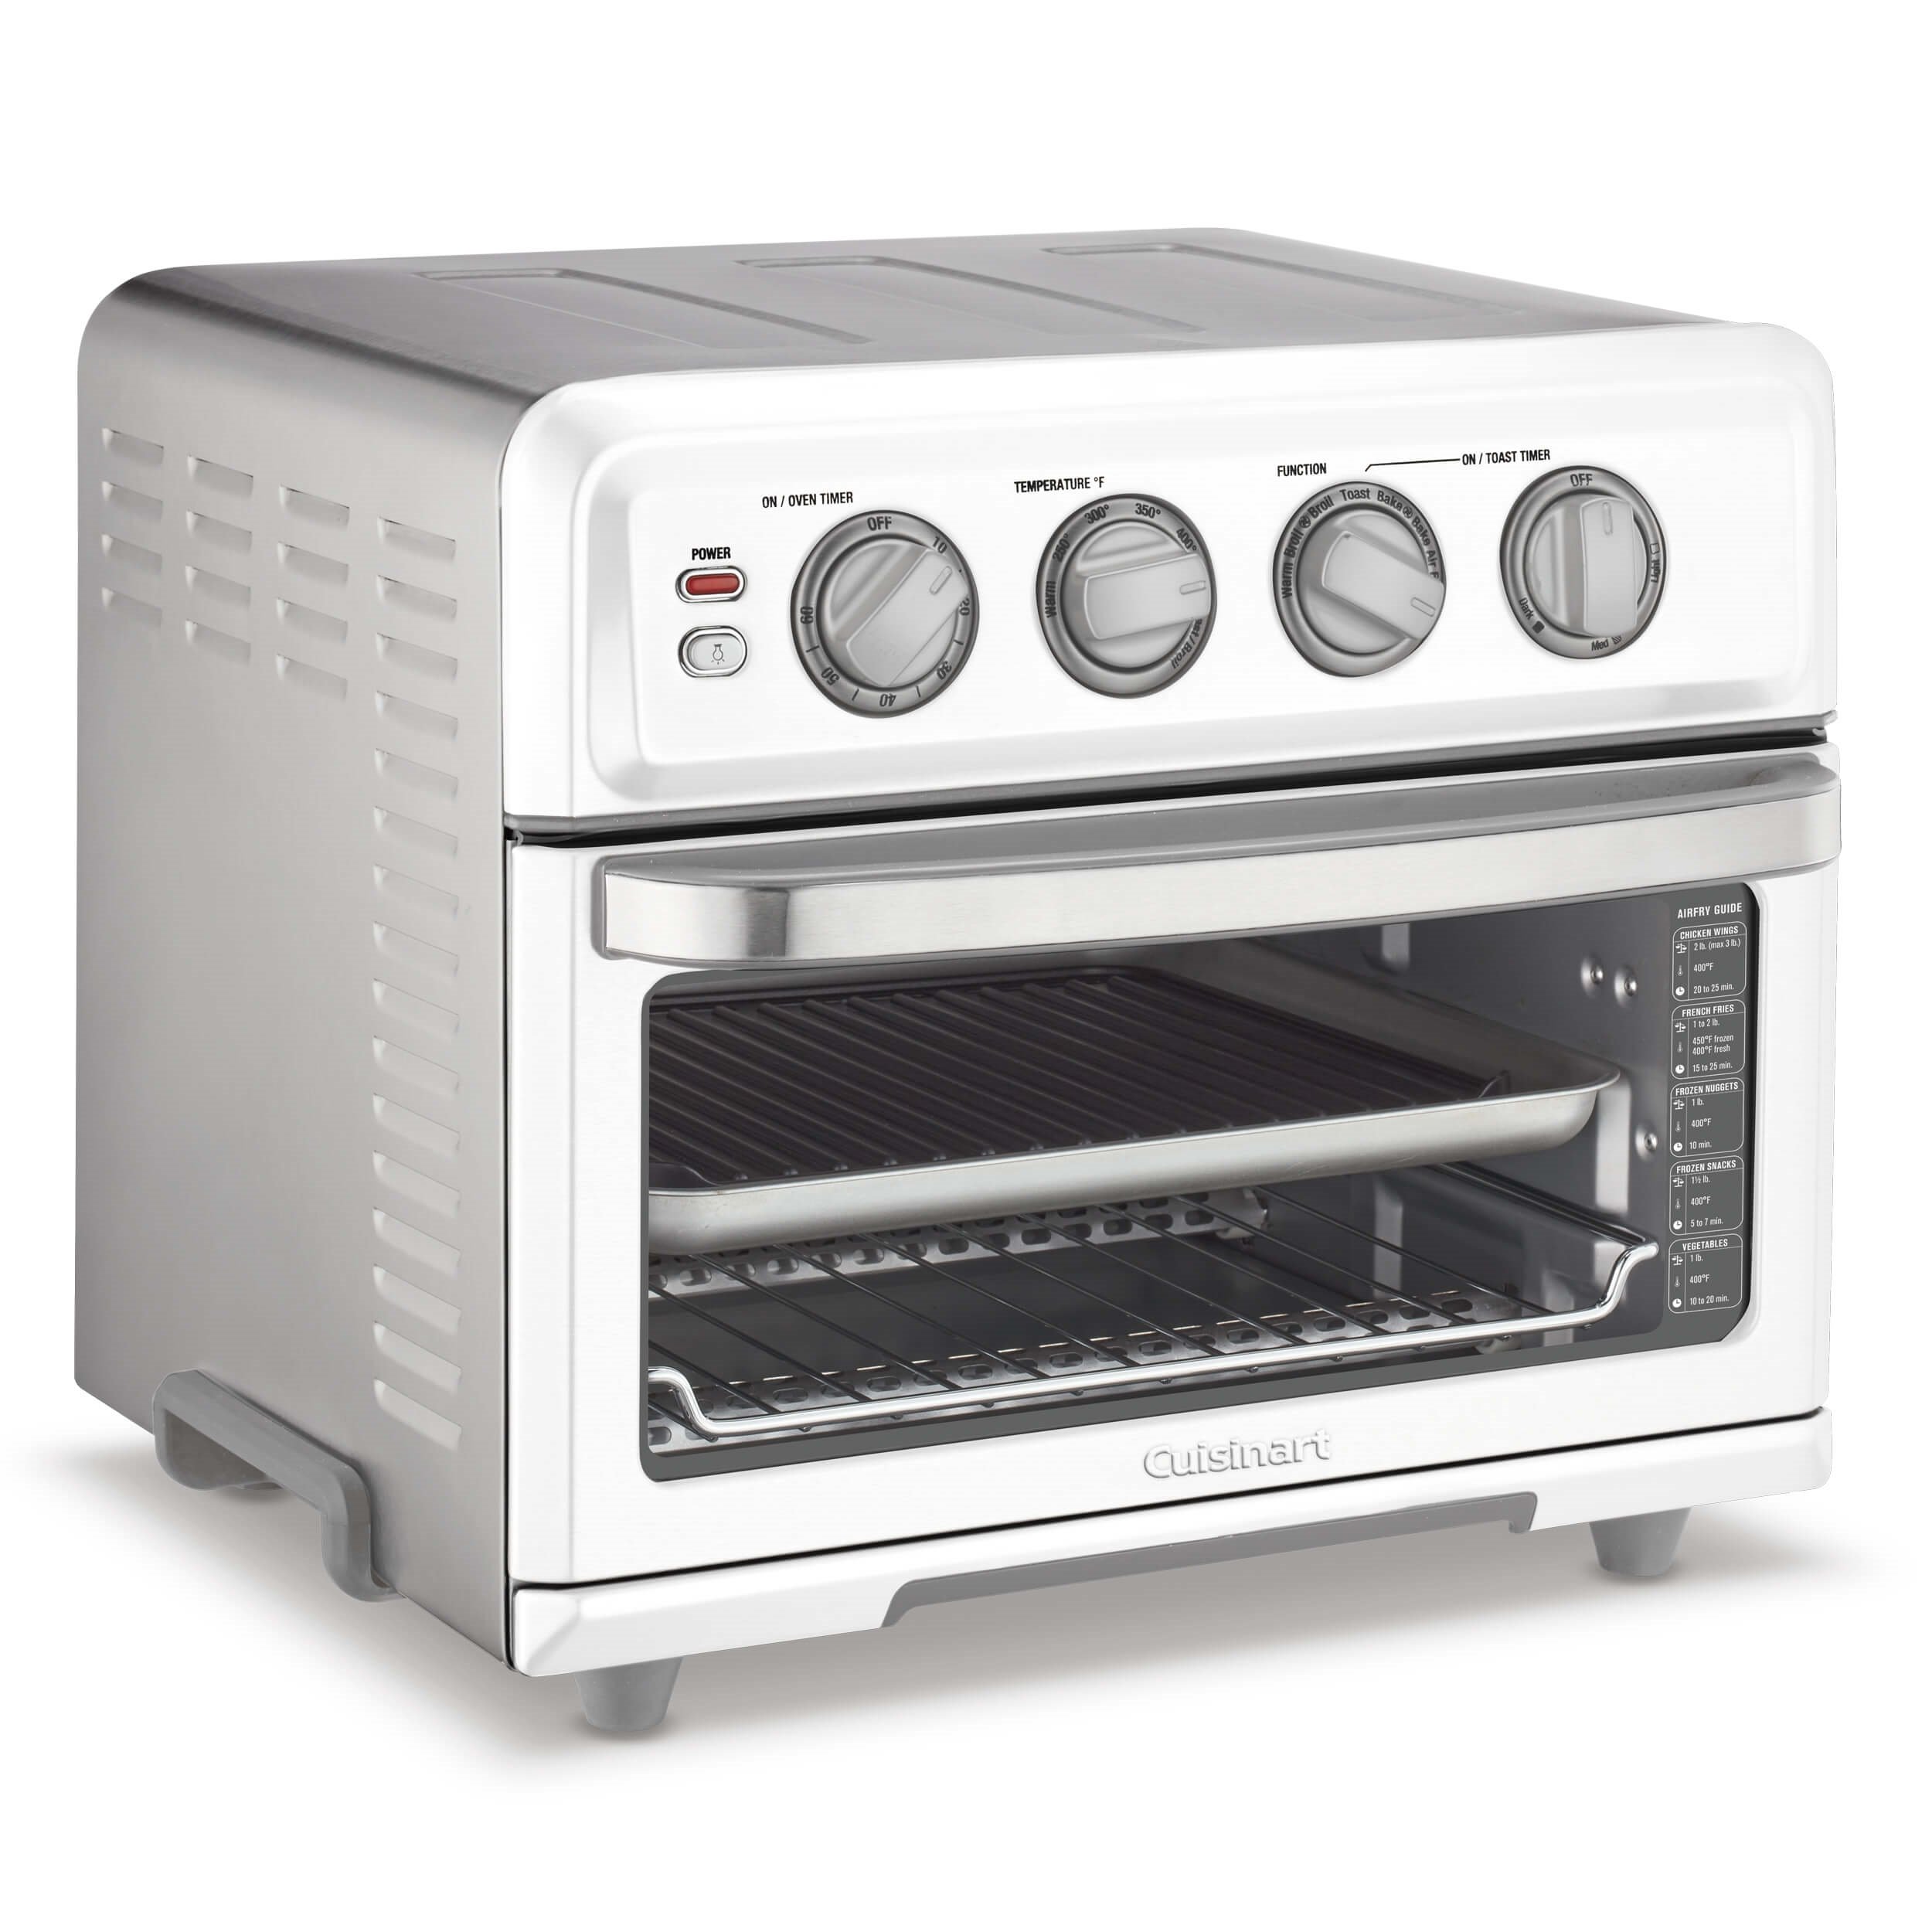 AirFryer Toaster Oven with Grill